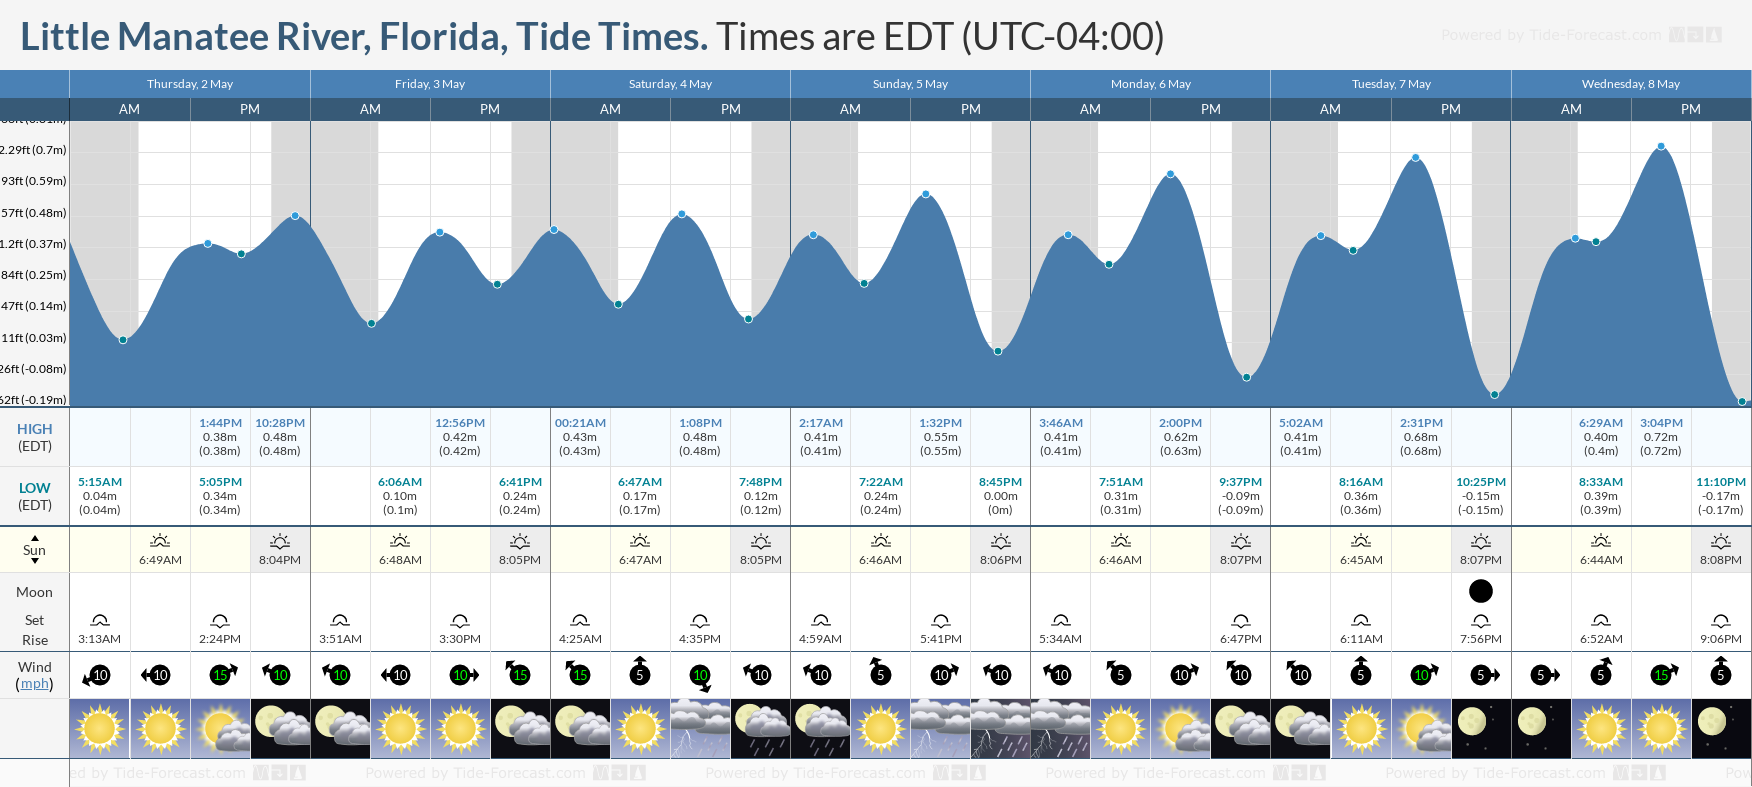 Little Manatee River, Florida Tide Chart including high and low tide tide times for the next 7 days